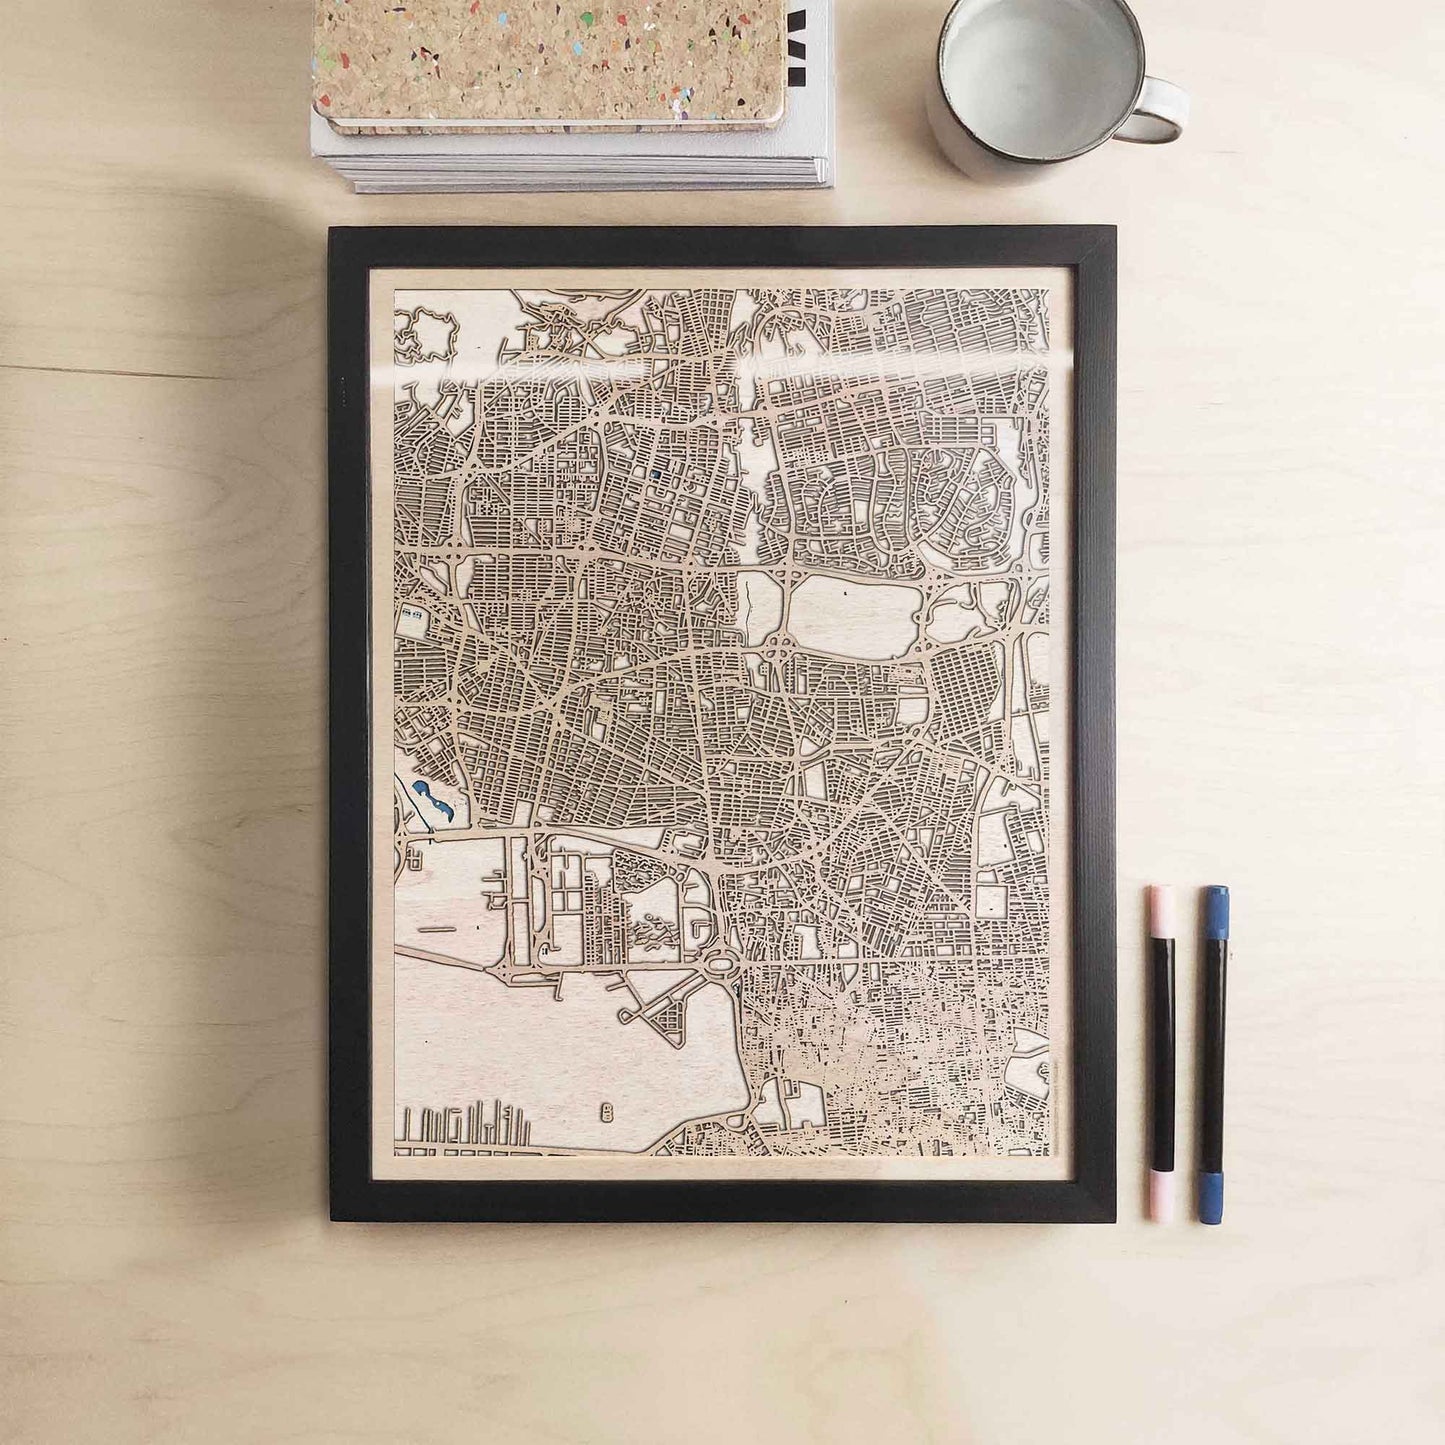 Teheran Wooden Map by CityWood - Custom Wood Map Art - Unique Laser Cut Engraved - Anniversary Gift